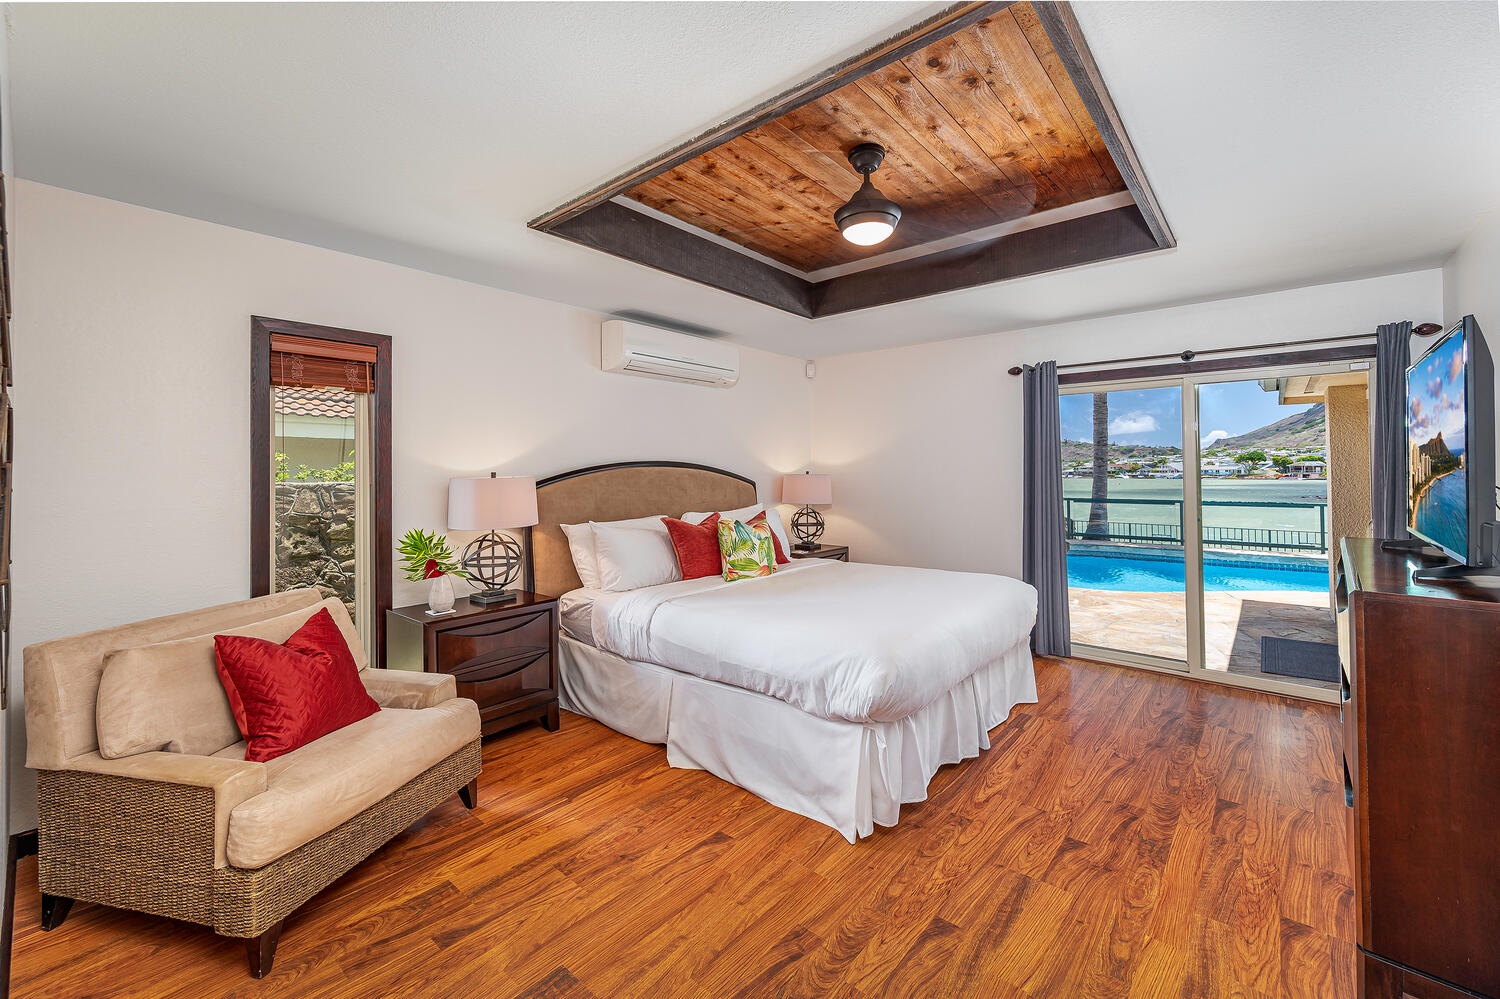 Honolulu Vacation Rentals, Nani Wai - Primary bedroom with marina and pool view and its own ensuite and walk in closet.